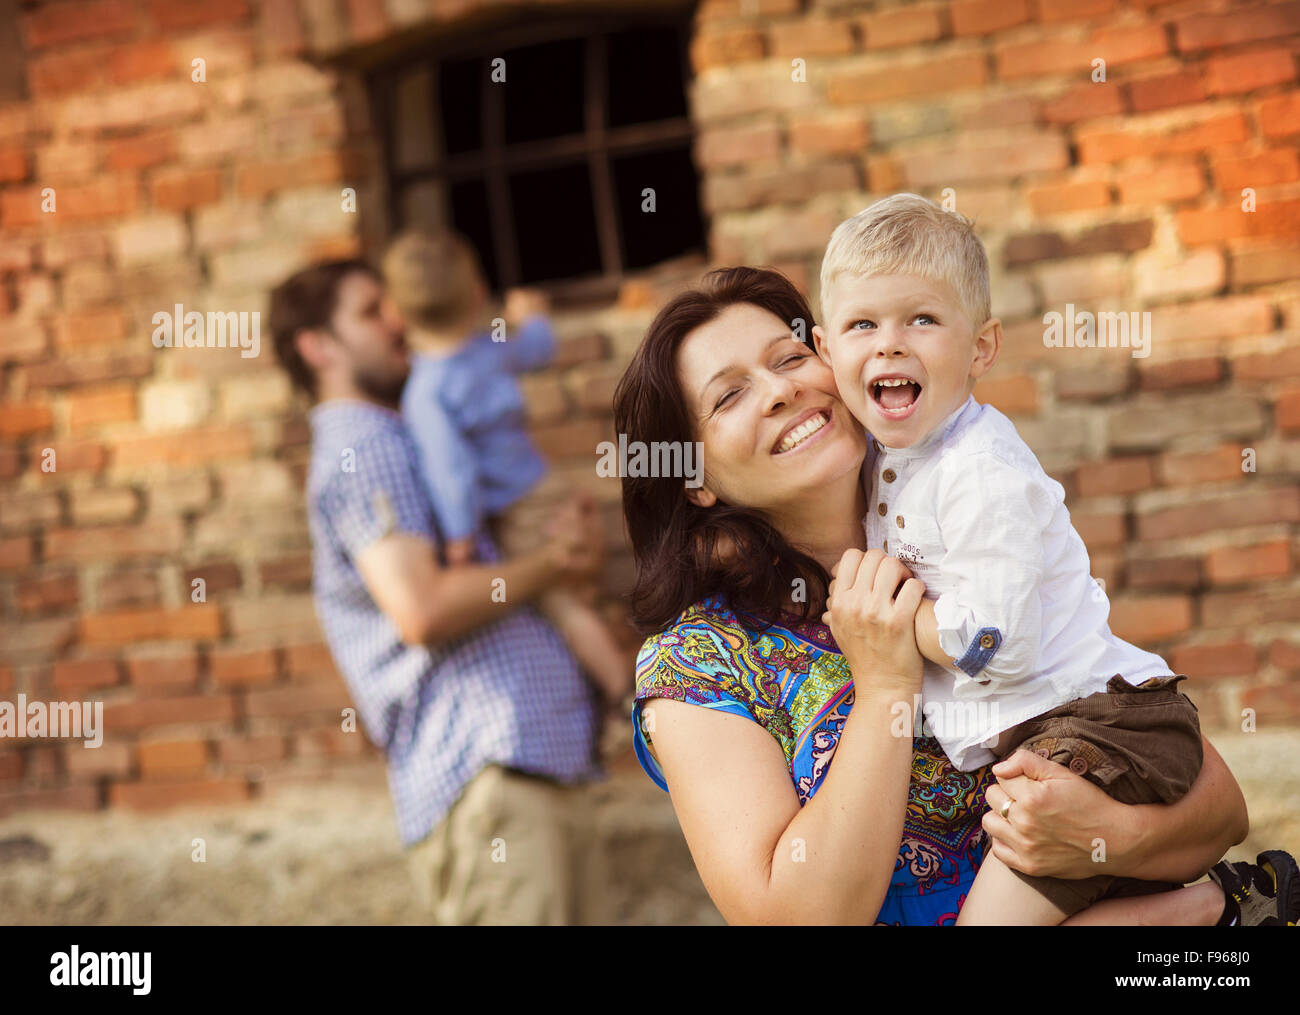 Happy young family have fun together in nature by the old brick house Stock Photo